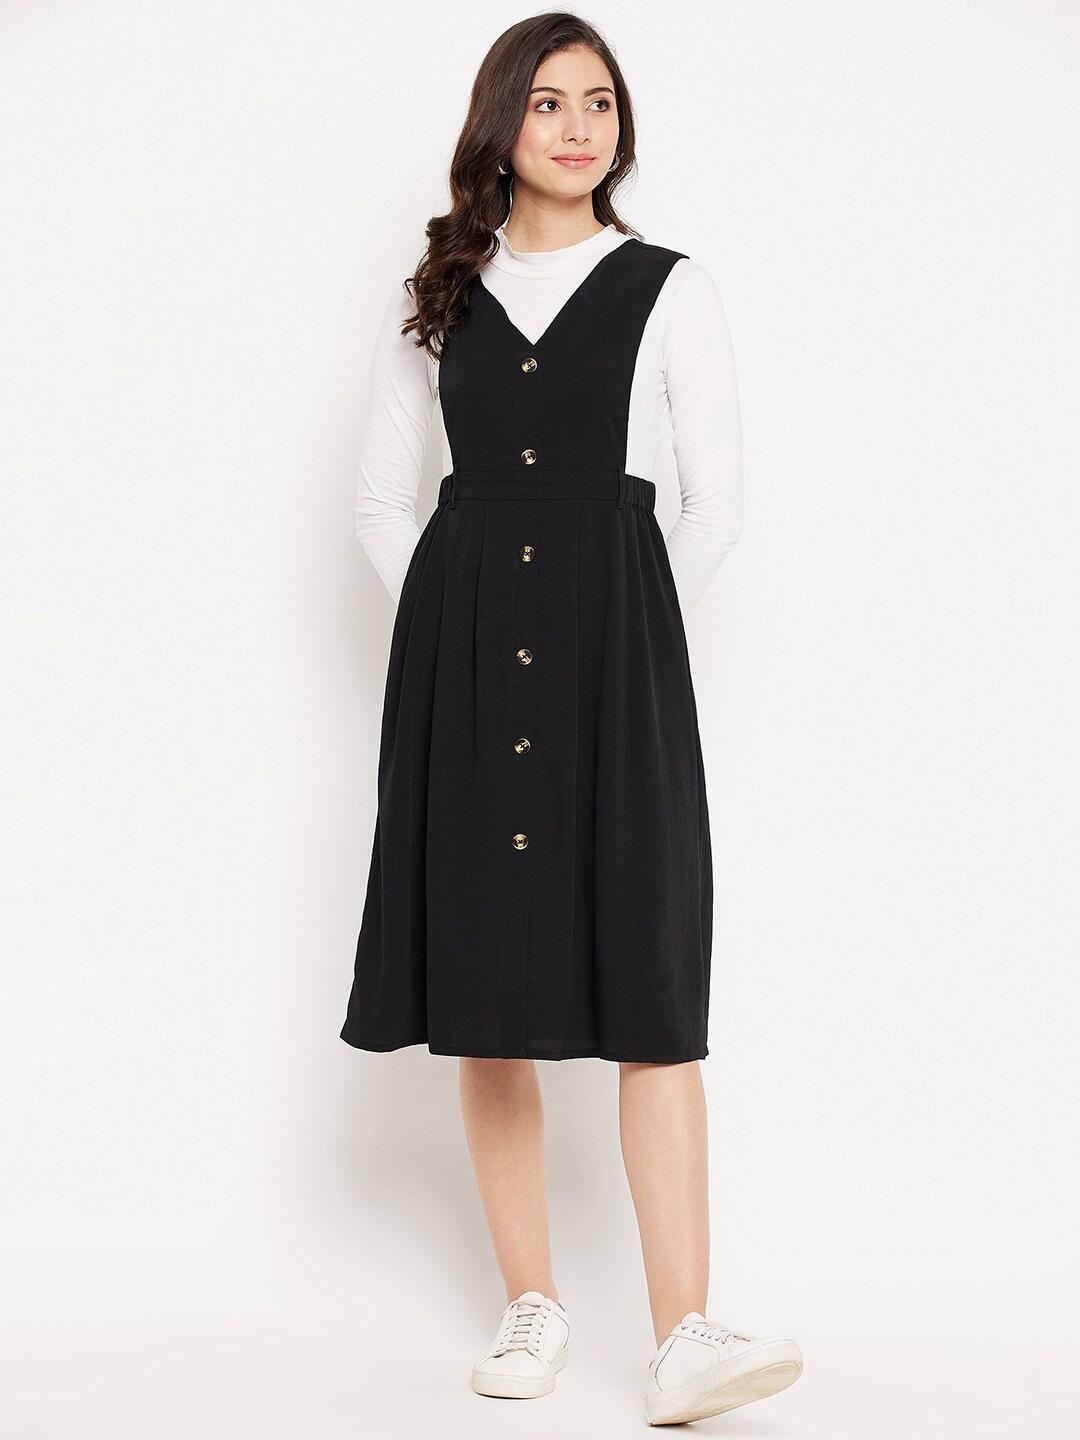 winered-women-black-crepe-pinafore-dress-with-button